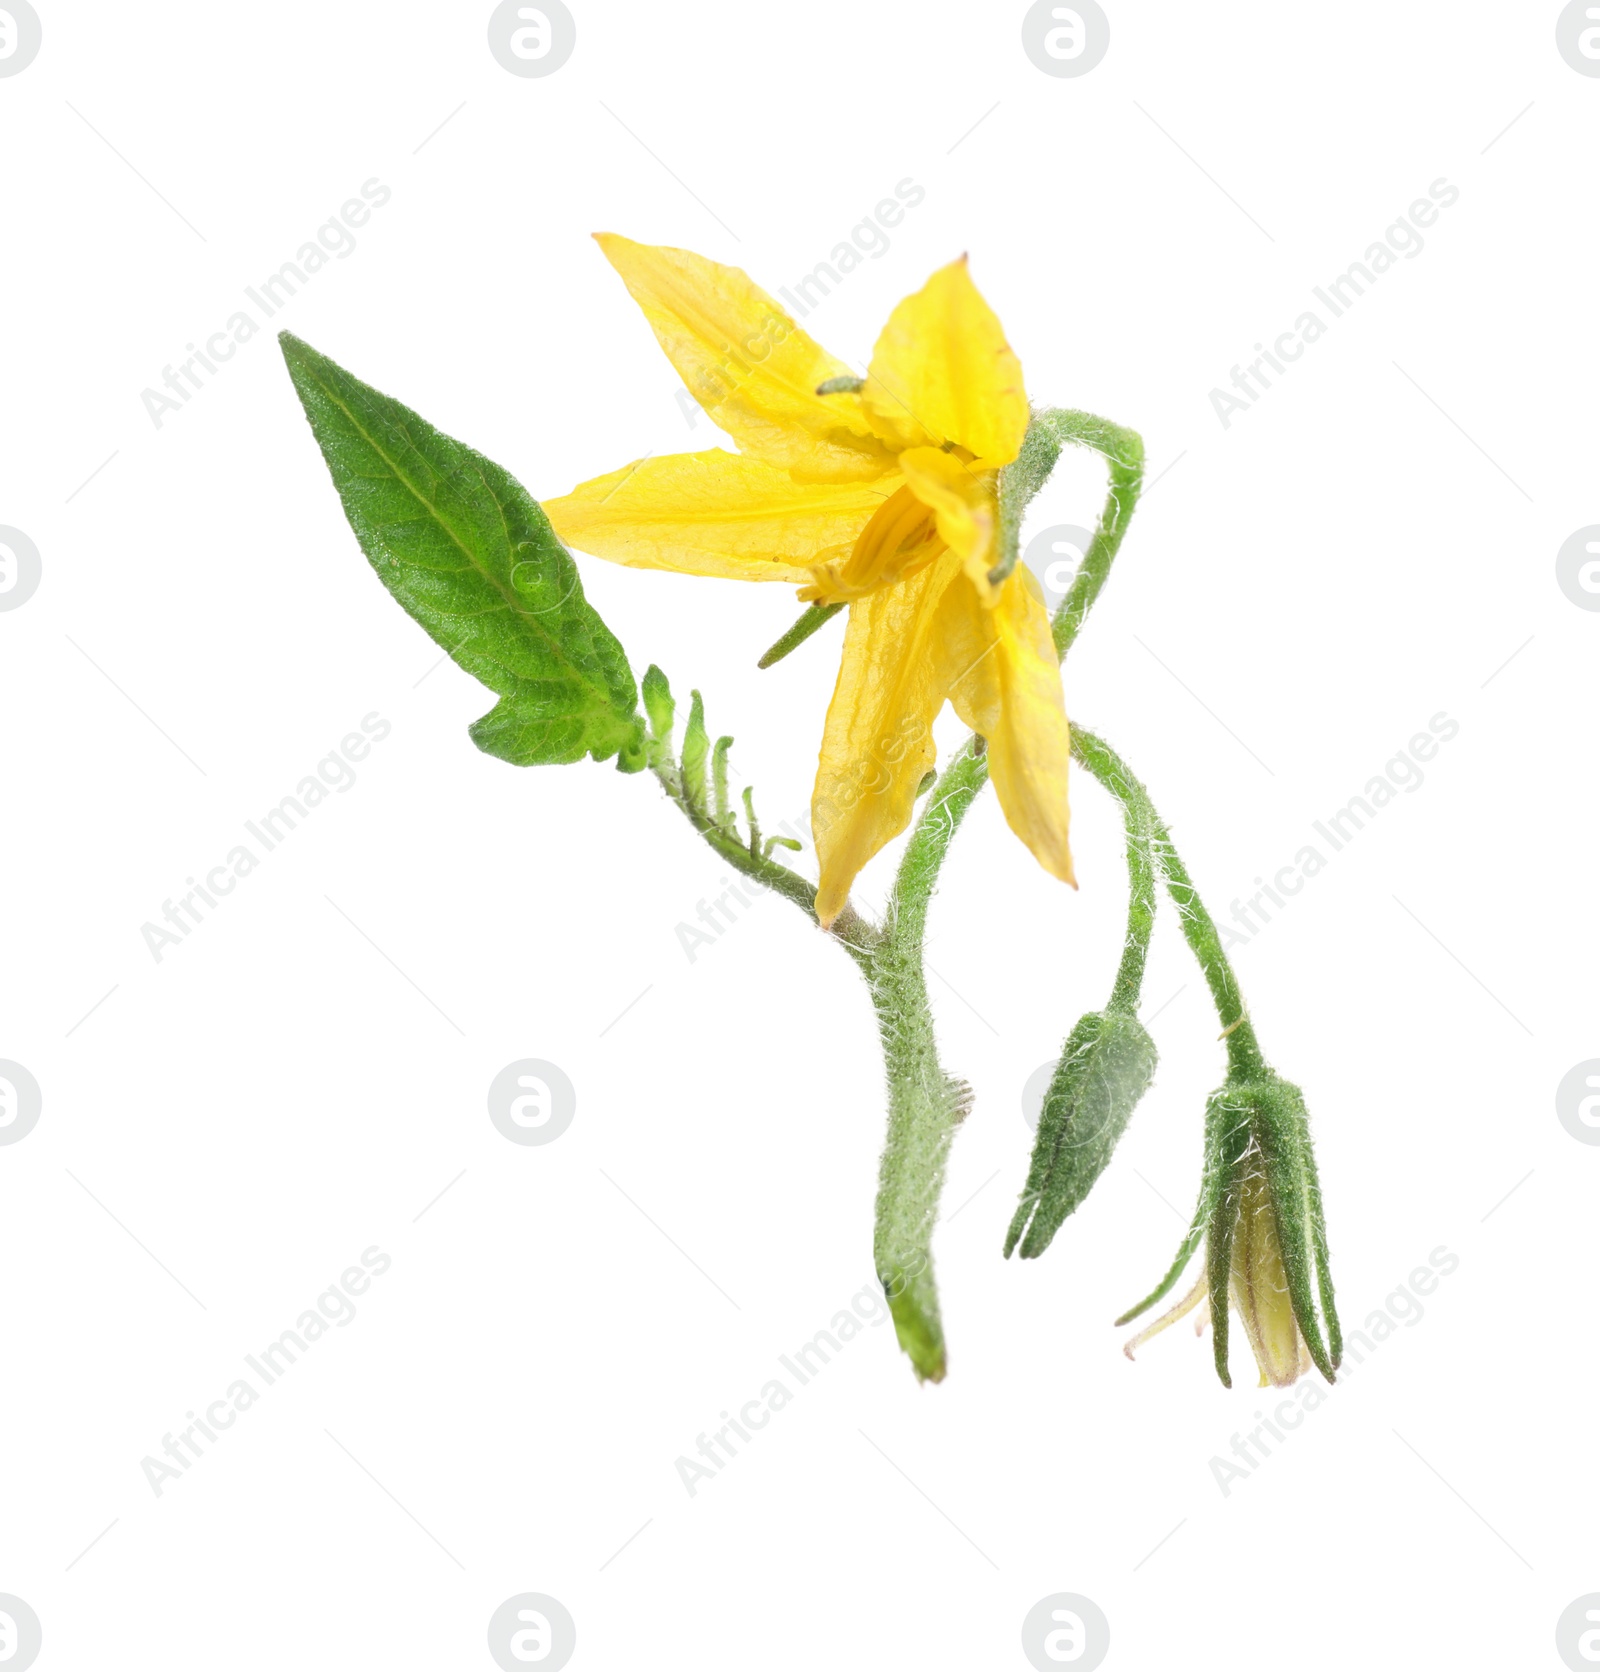 Photo of Tomato plant with flower and green leaf isolated on white